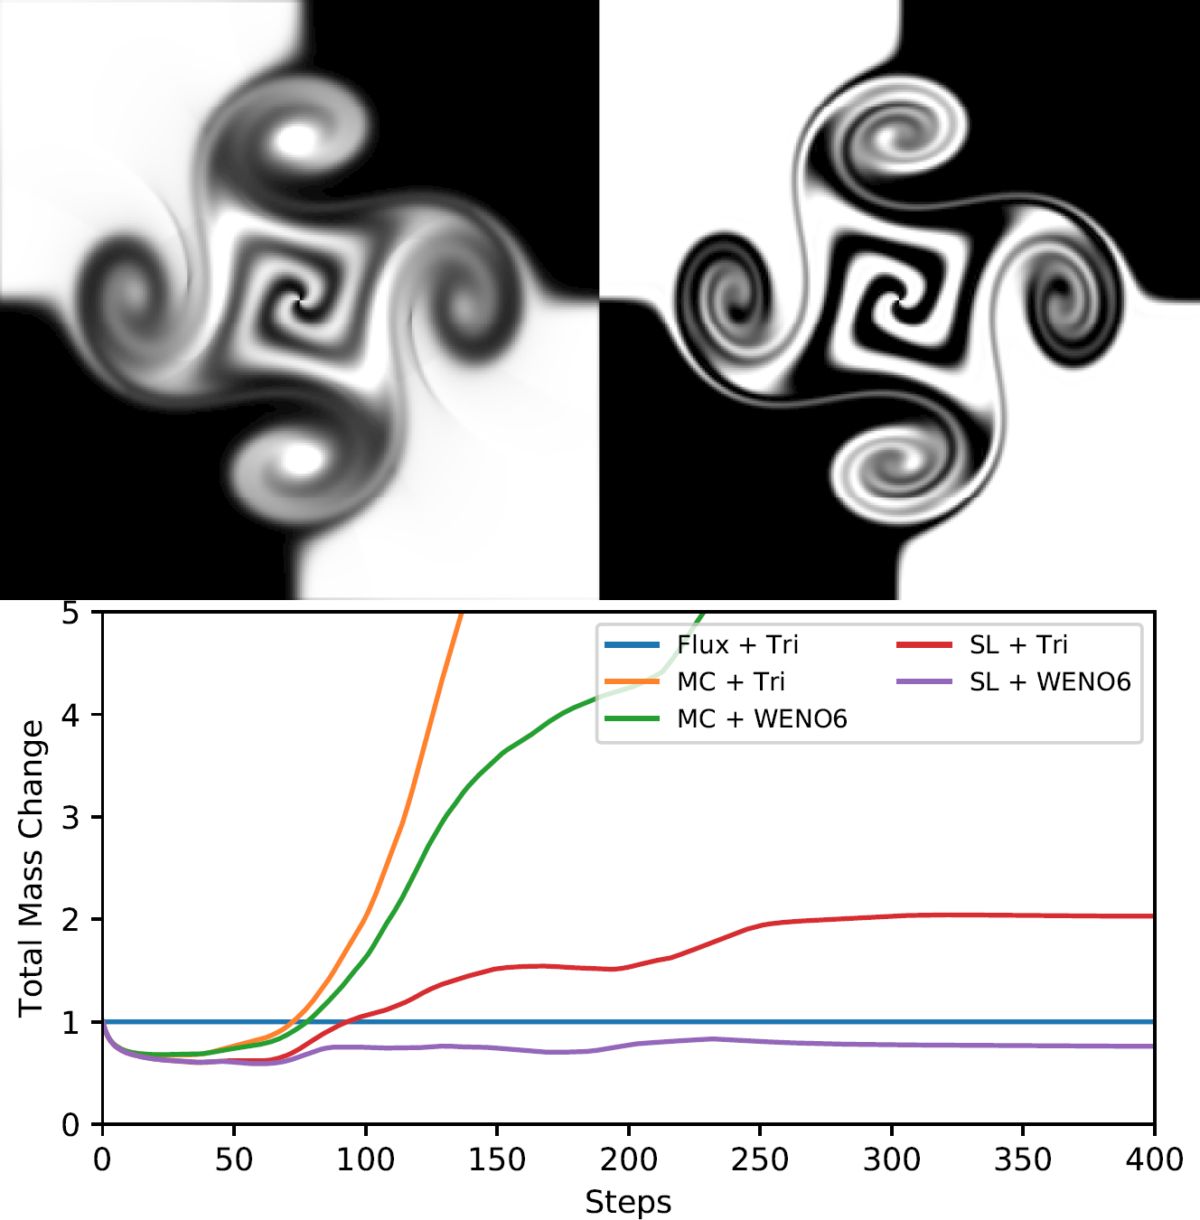 A Flux-Interpolated Advection Scheme for Fluid Simulation